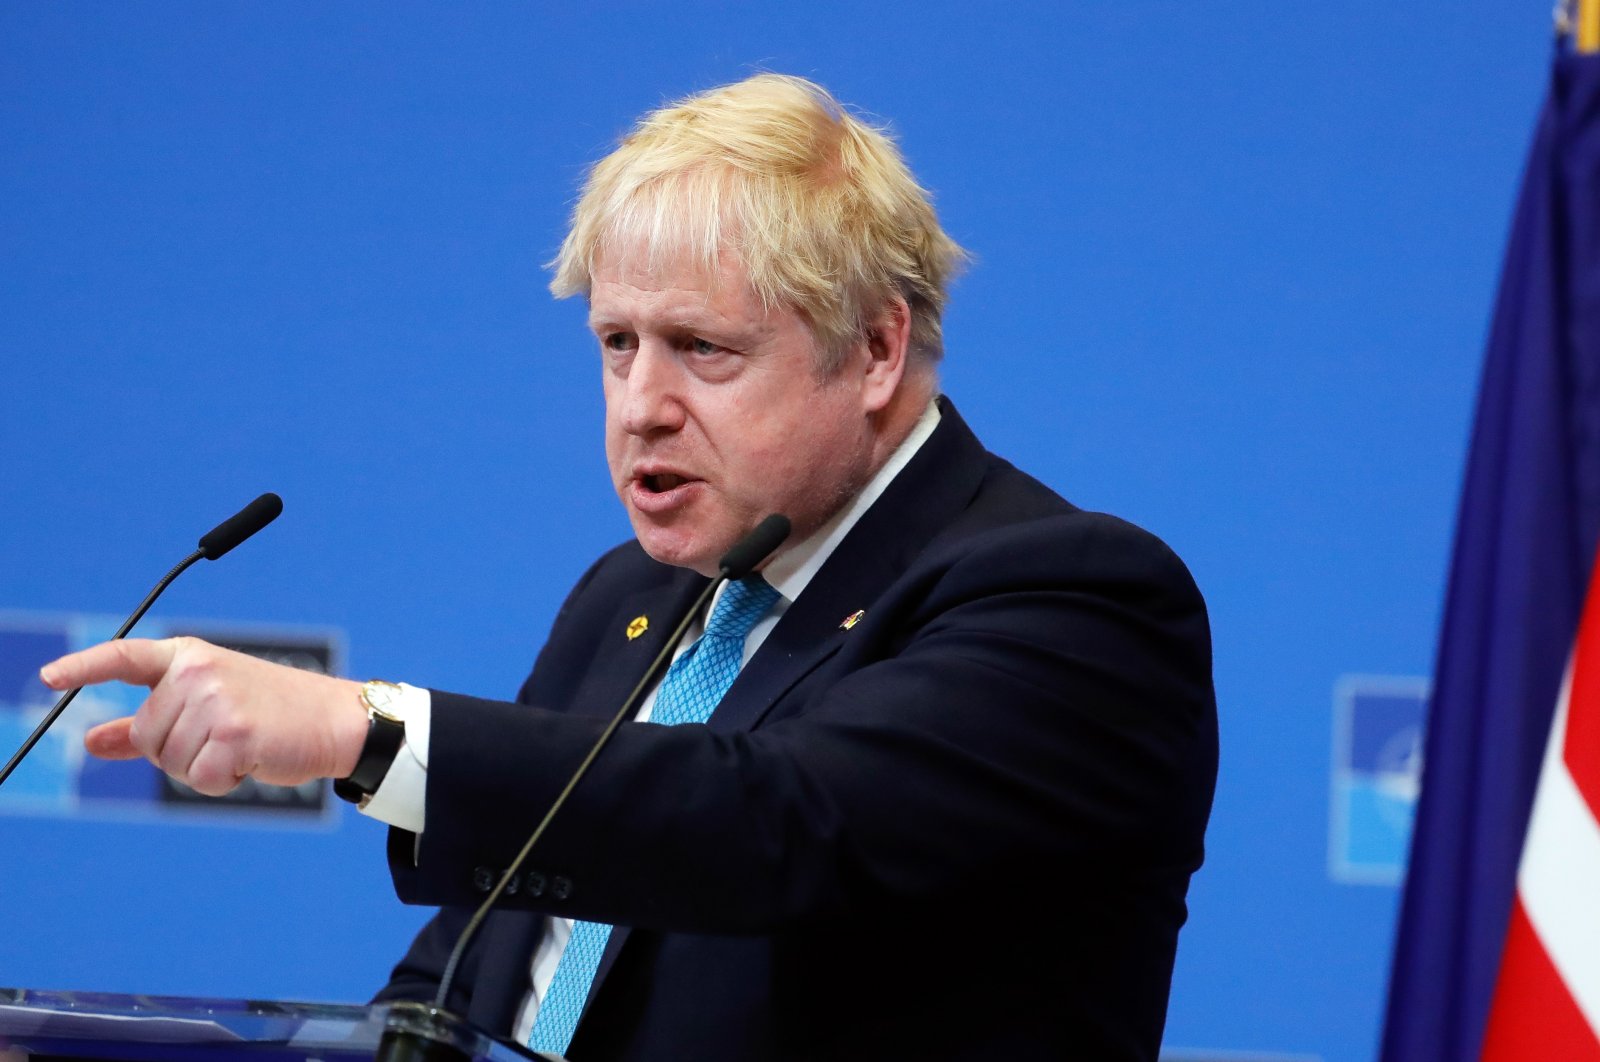 British Prime Minister Boris Johnson gives a press conference at the end of a NATO meeting at the Alliance headquarters in Brussels, Belgium, March 24, 2022. (EPA Photo)